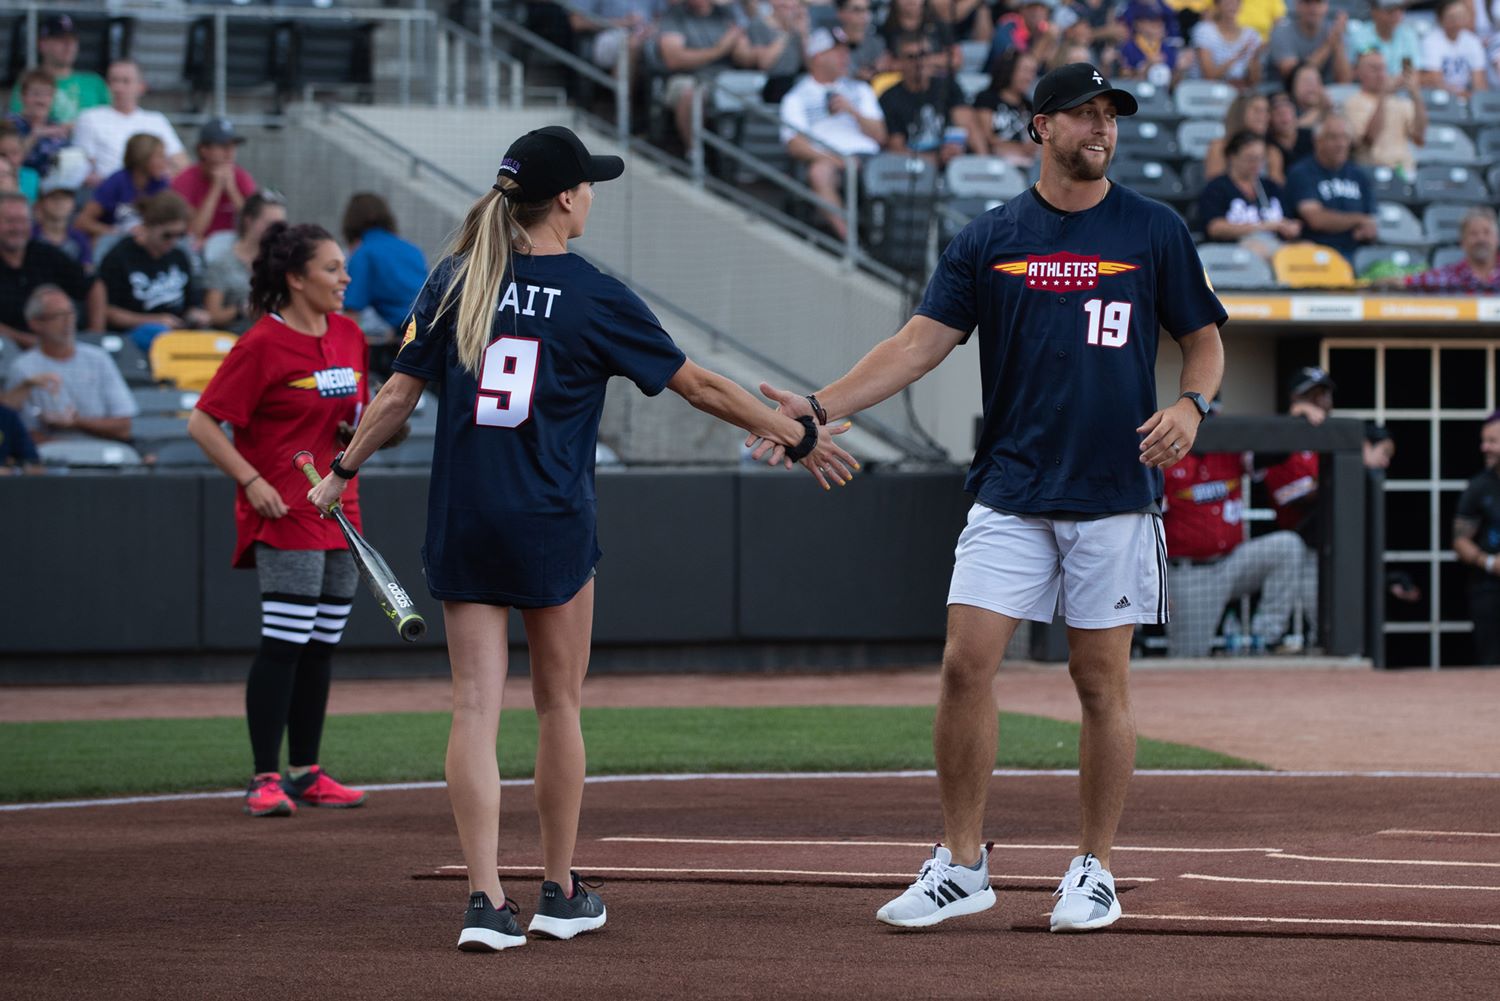 How To Watch Celebrity Softball Game